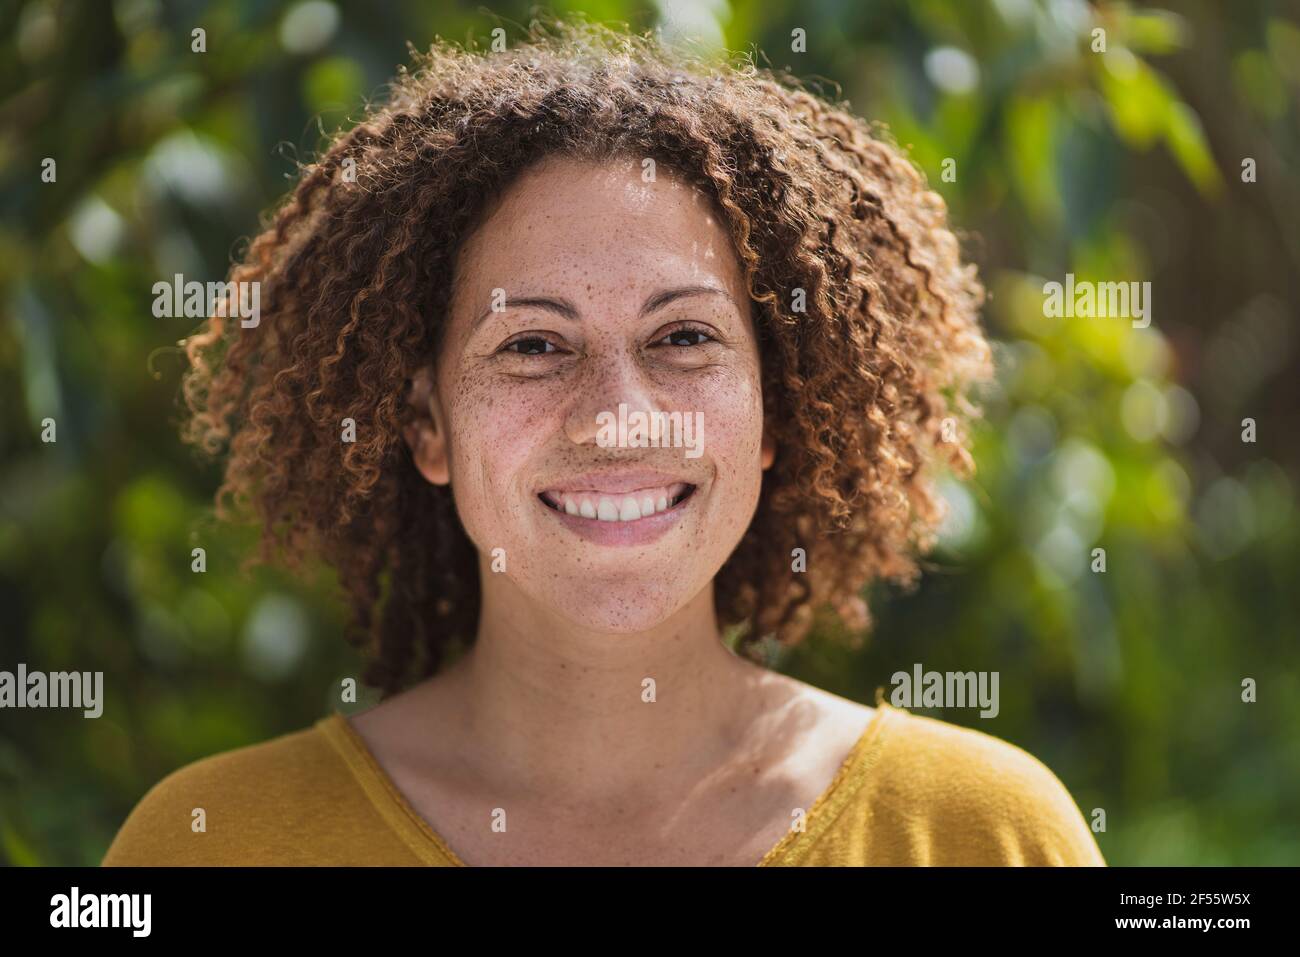 Smiling curly haired woman with freckles in vegetable garden Stock Photo